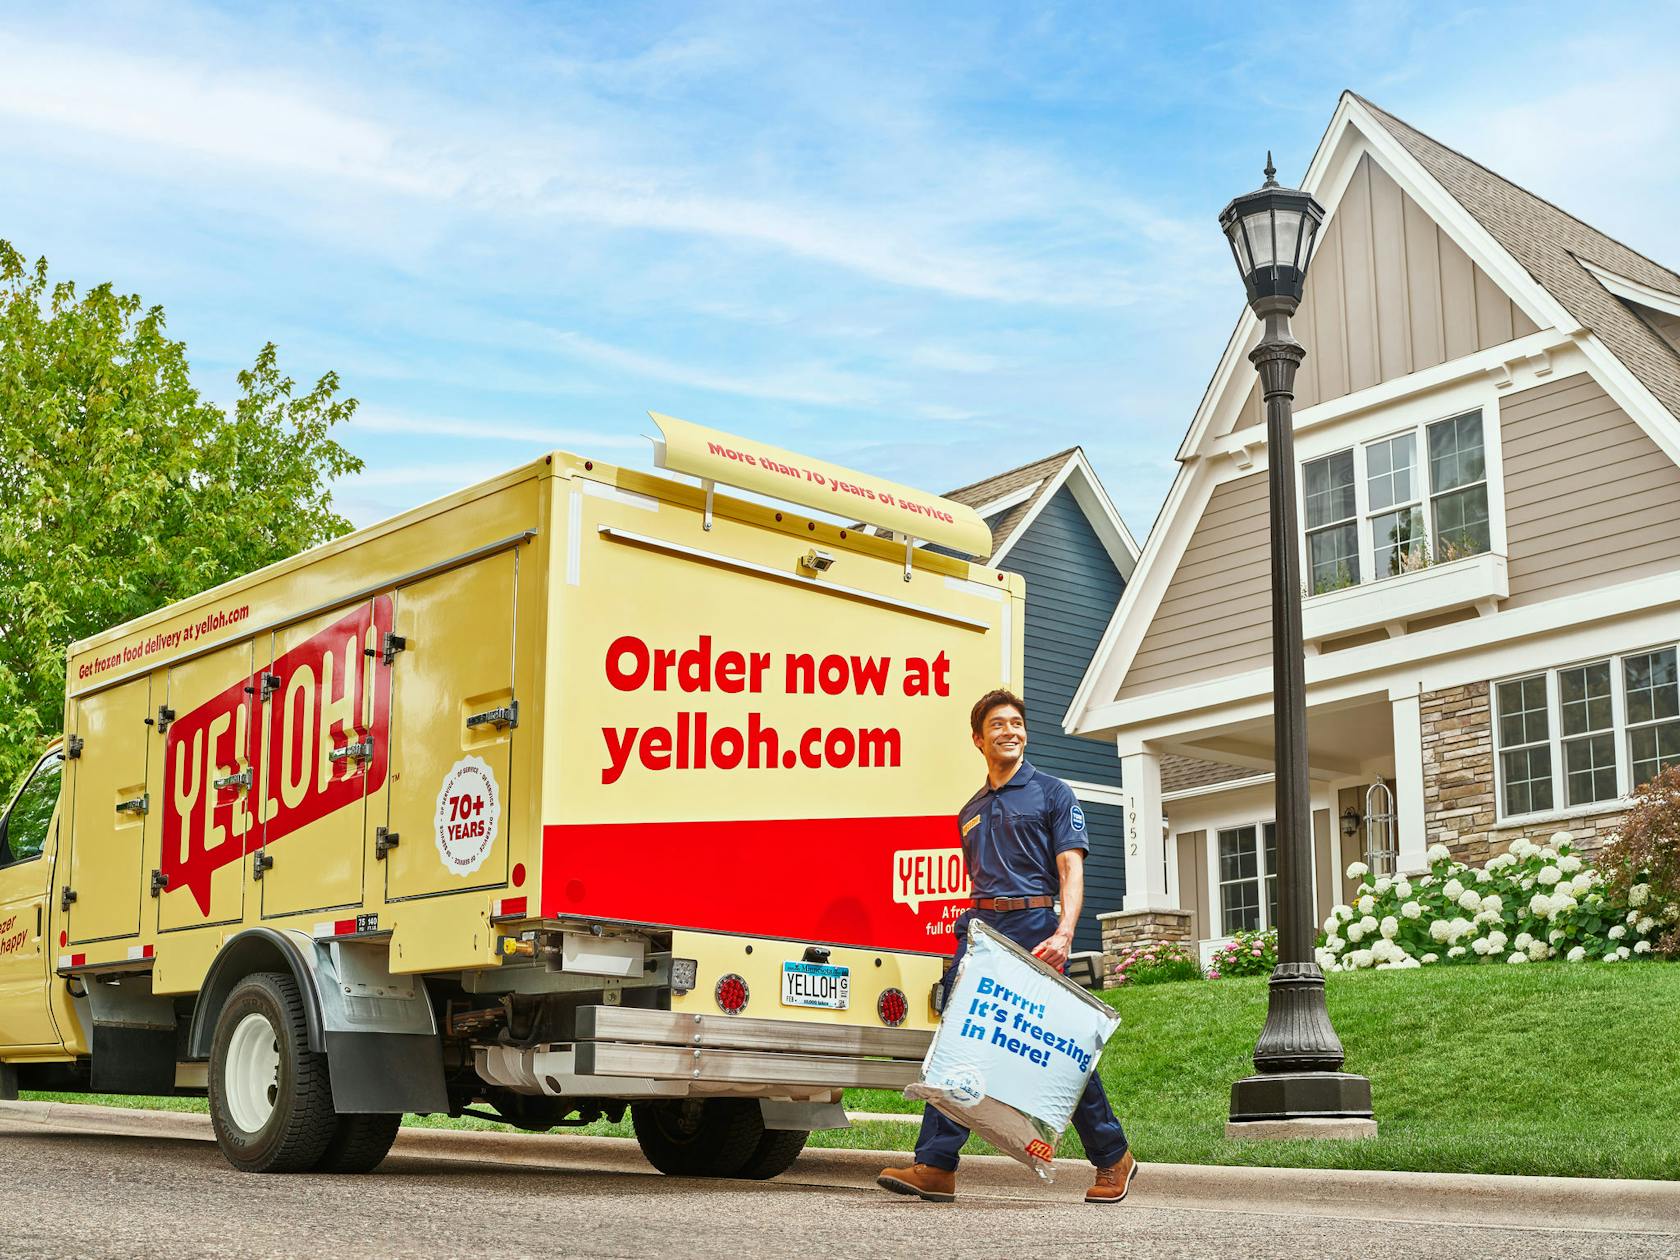 Yelloh Continues to Decrease Delivery Footprint and Cuts Jobs